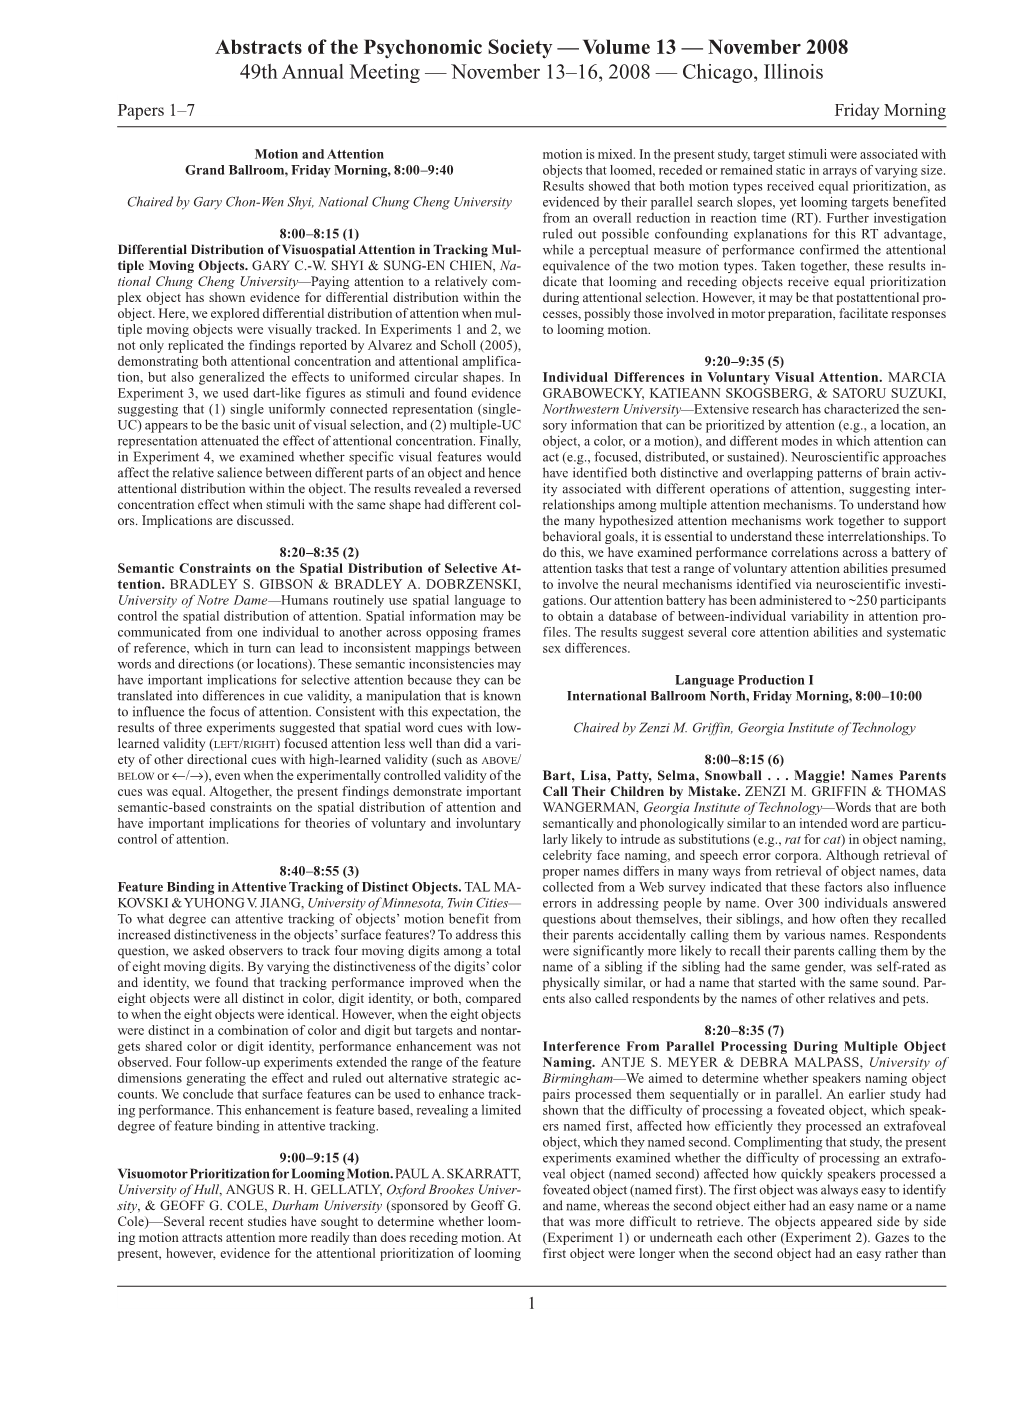 Abstracts of the Psychonomic Society — Volume 13 — November 2008 49Th Annual Meeting — November 13–16, 2008 — Chicago, Illinois